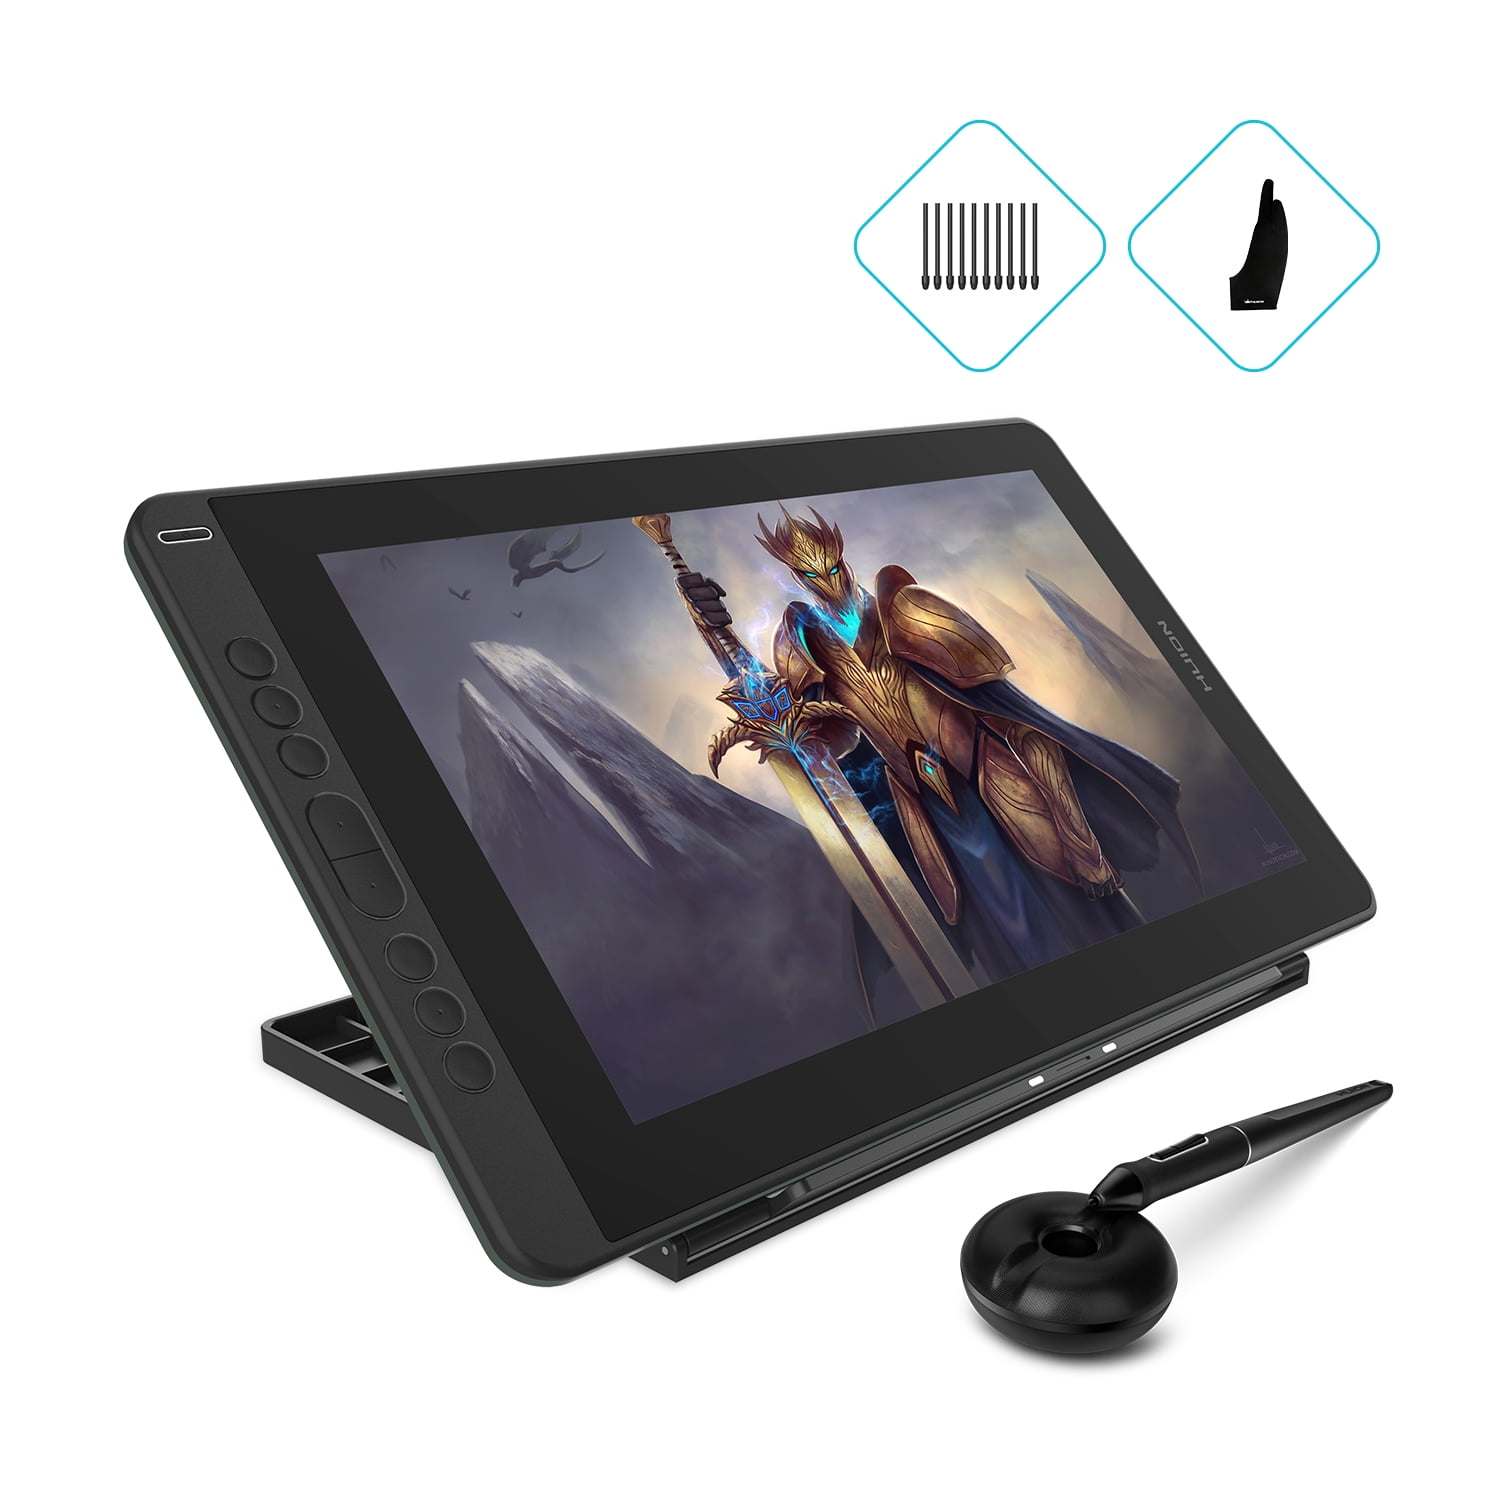 Huion KAMVAS 13 with Stand Graphics Drawing Pen Display Artist Tablet Green Digital Painting/Online Learning Gift